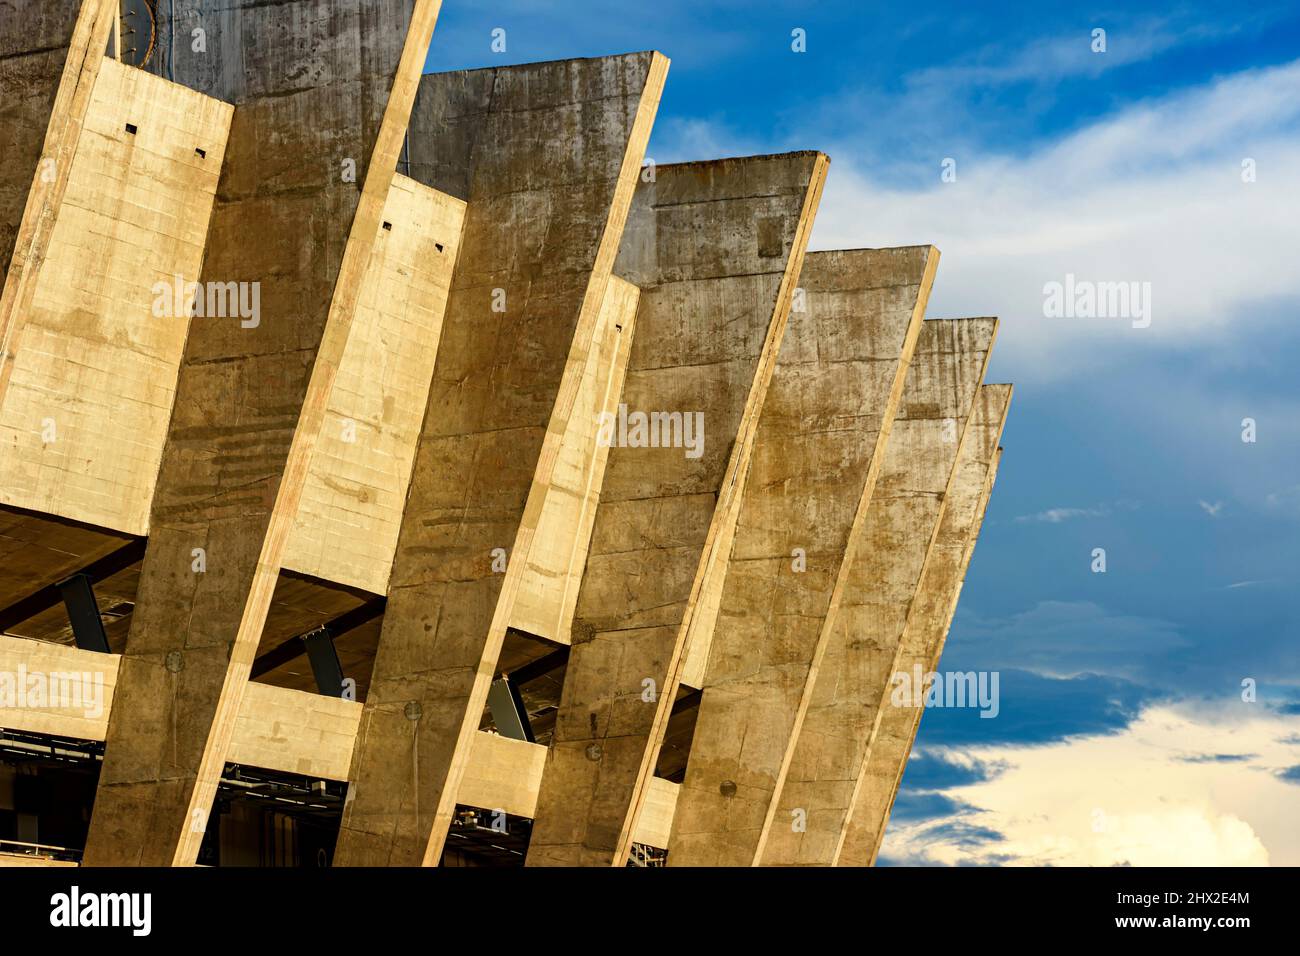 Detail of the columns of the famous Mineirao stadium, one of the temples of Brazilian football in the city of Belo Horizonte, Minas Gerais. Stock Photo